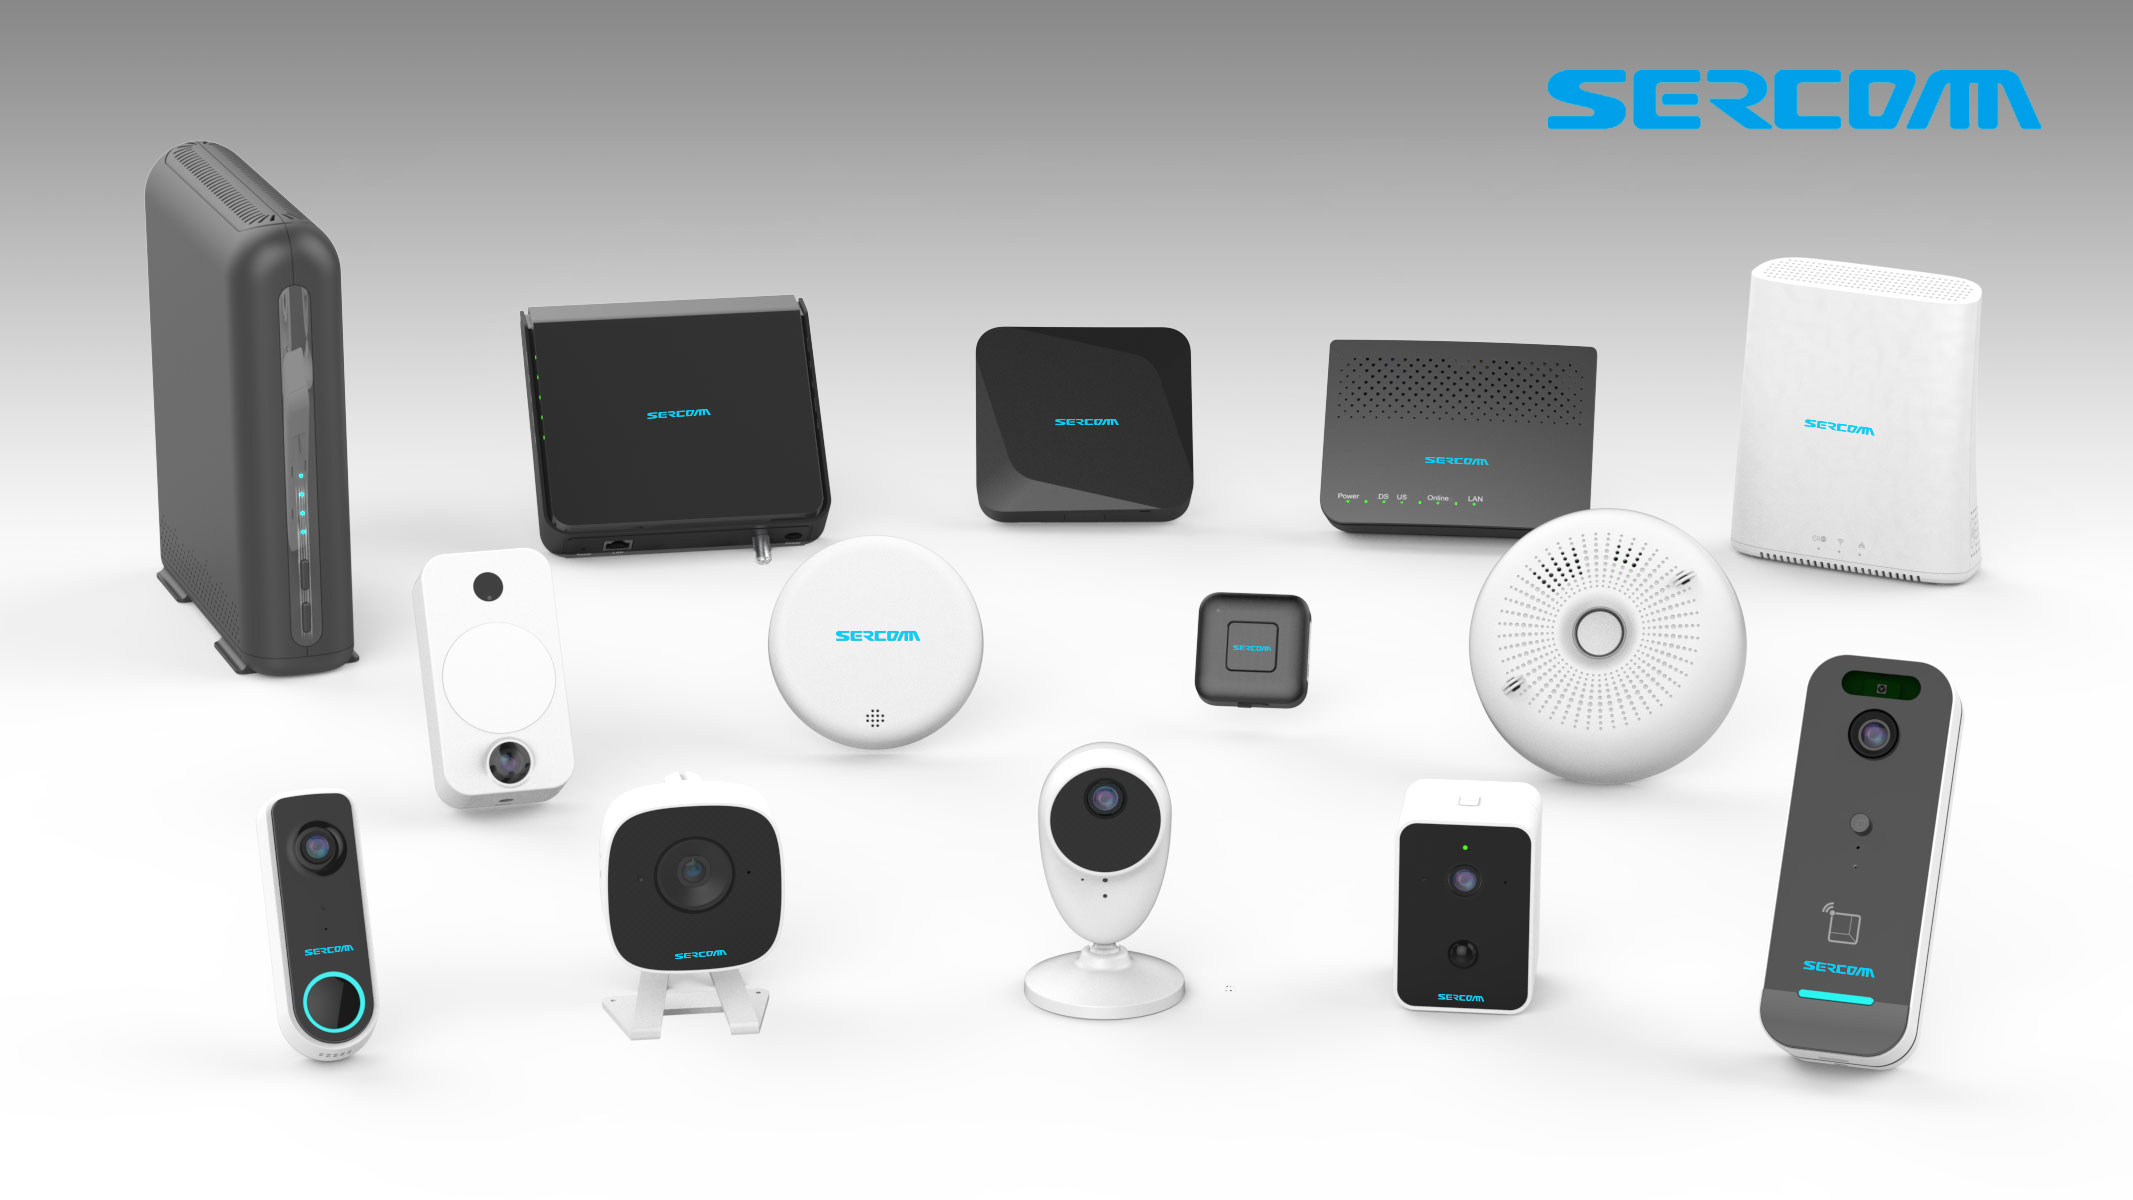 Smart Home Devices & Systems